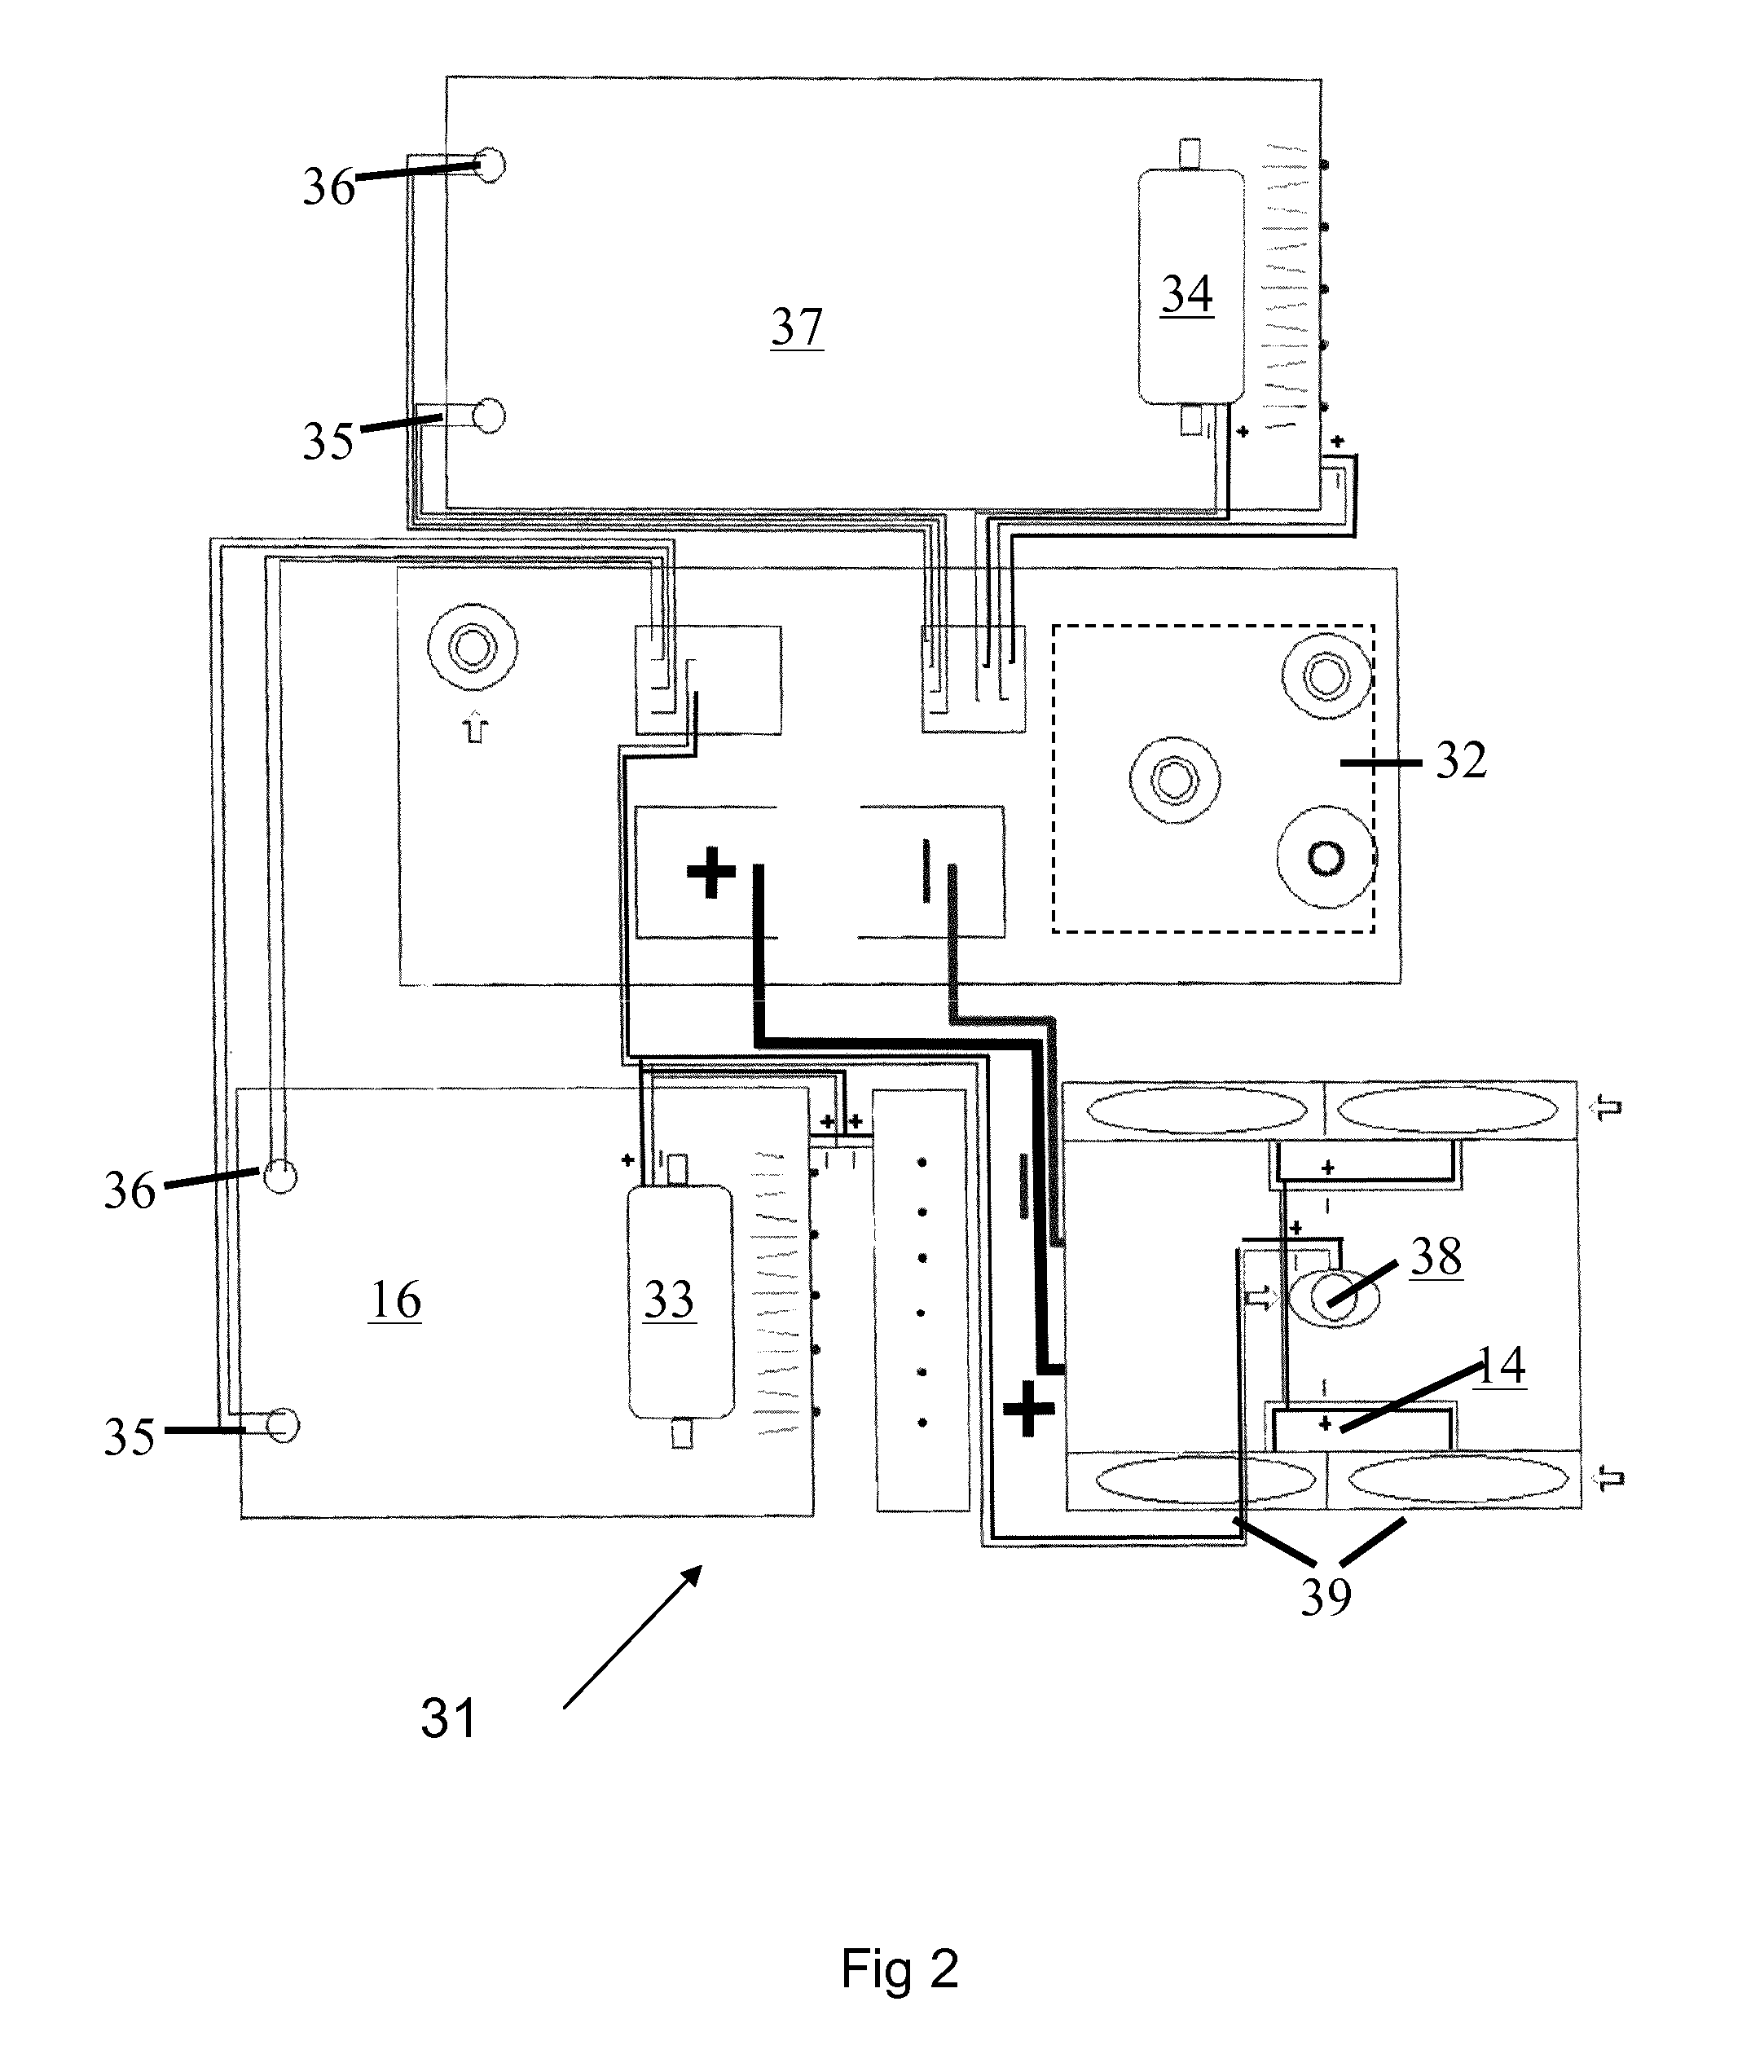 Hydrogen feed method and systems for engines